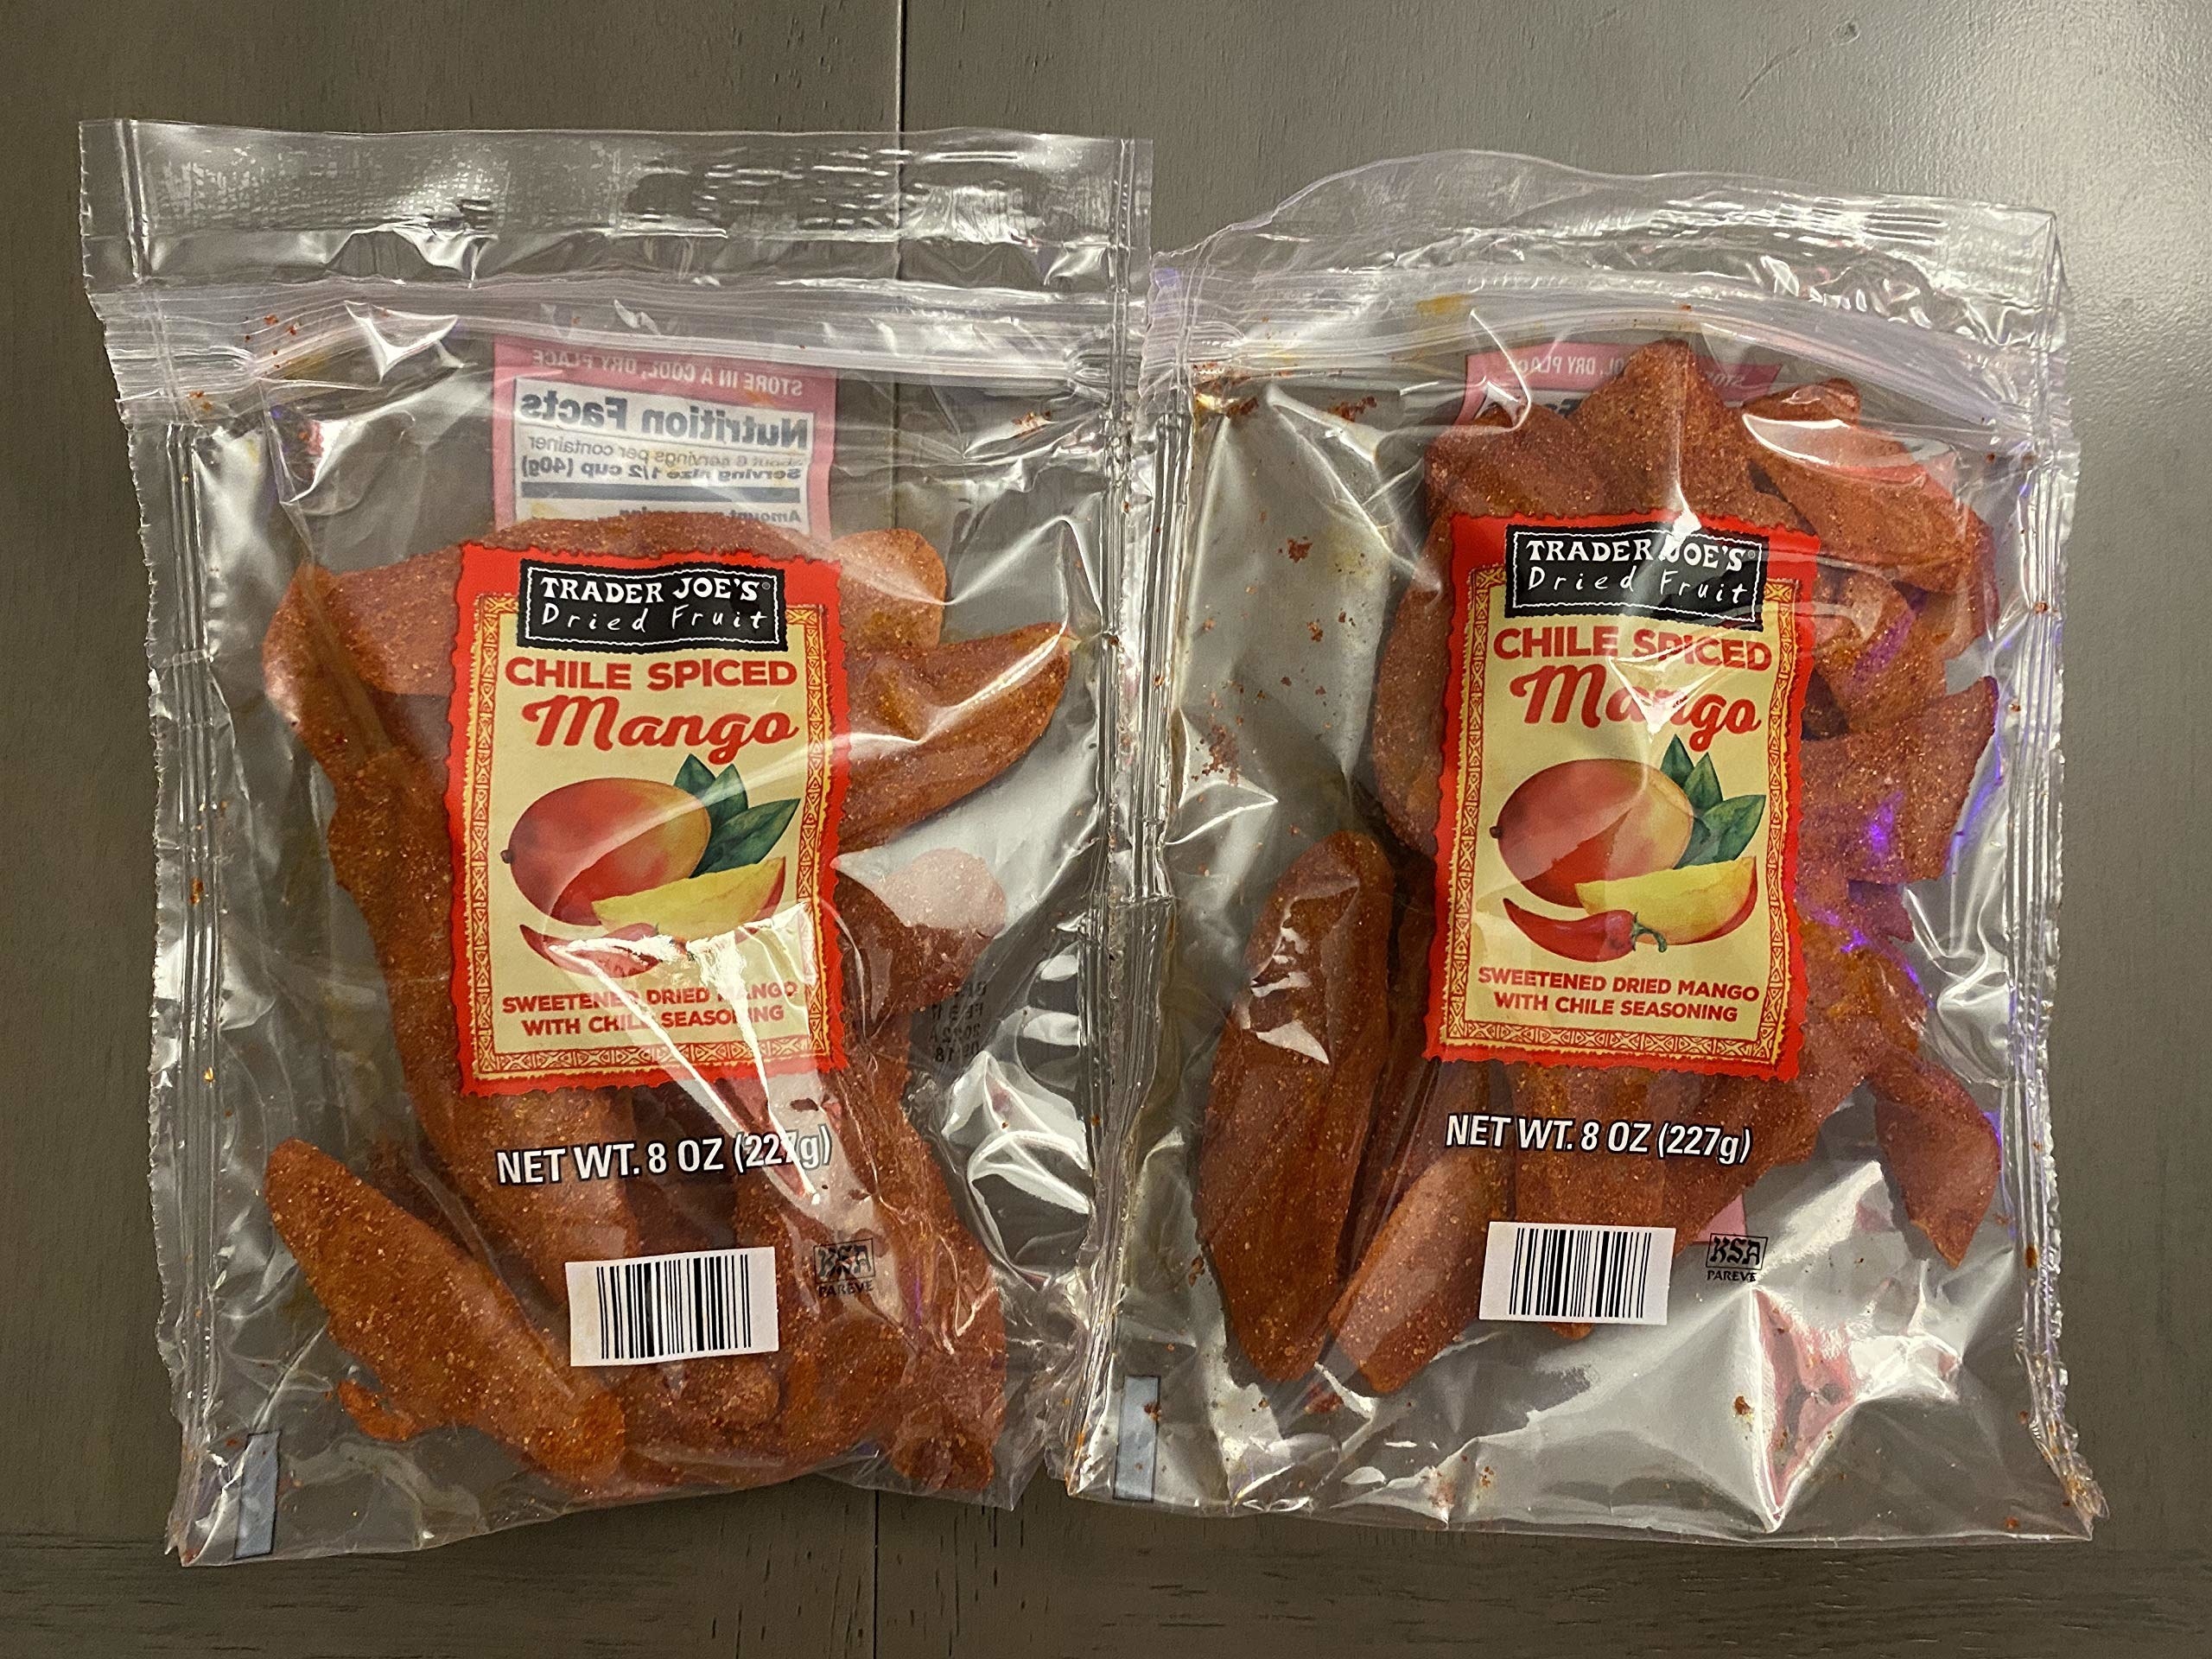 Packages of Dried Chile Spiced Mango.